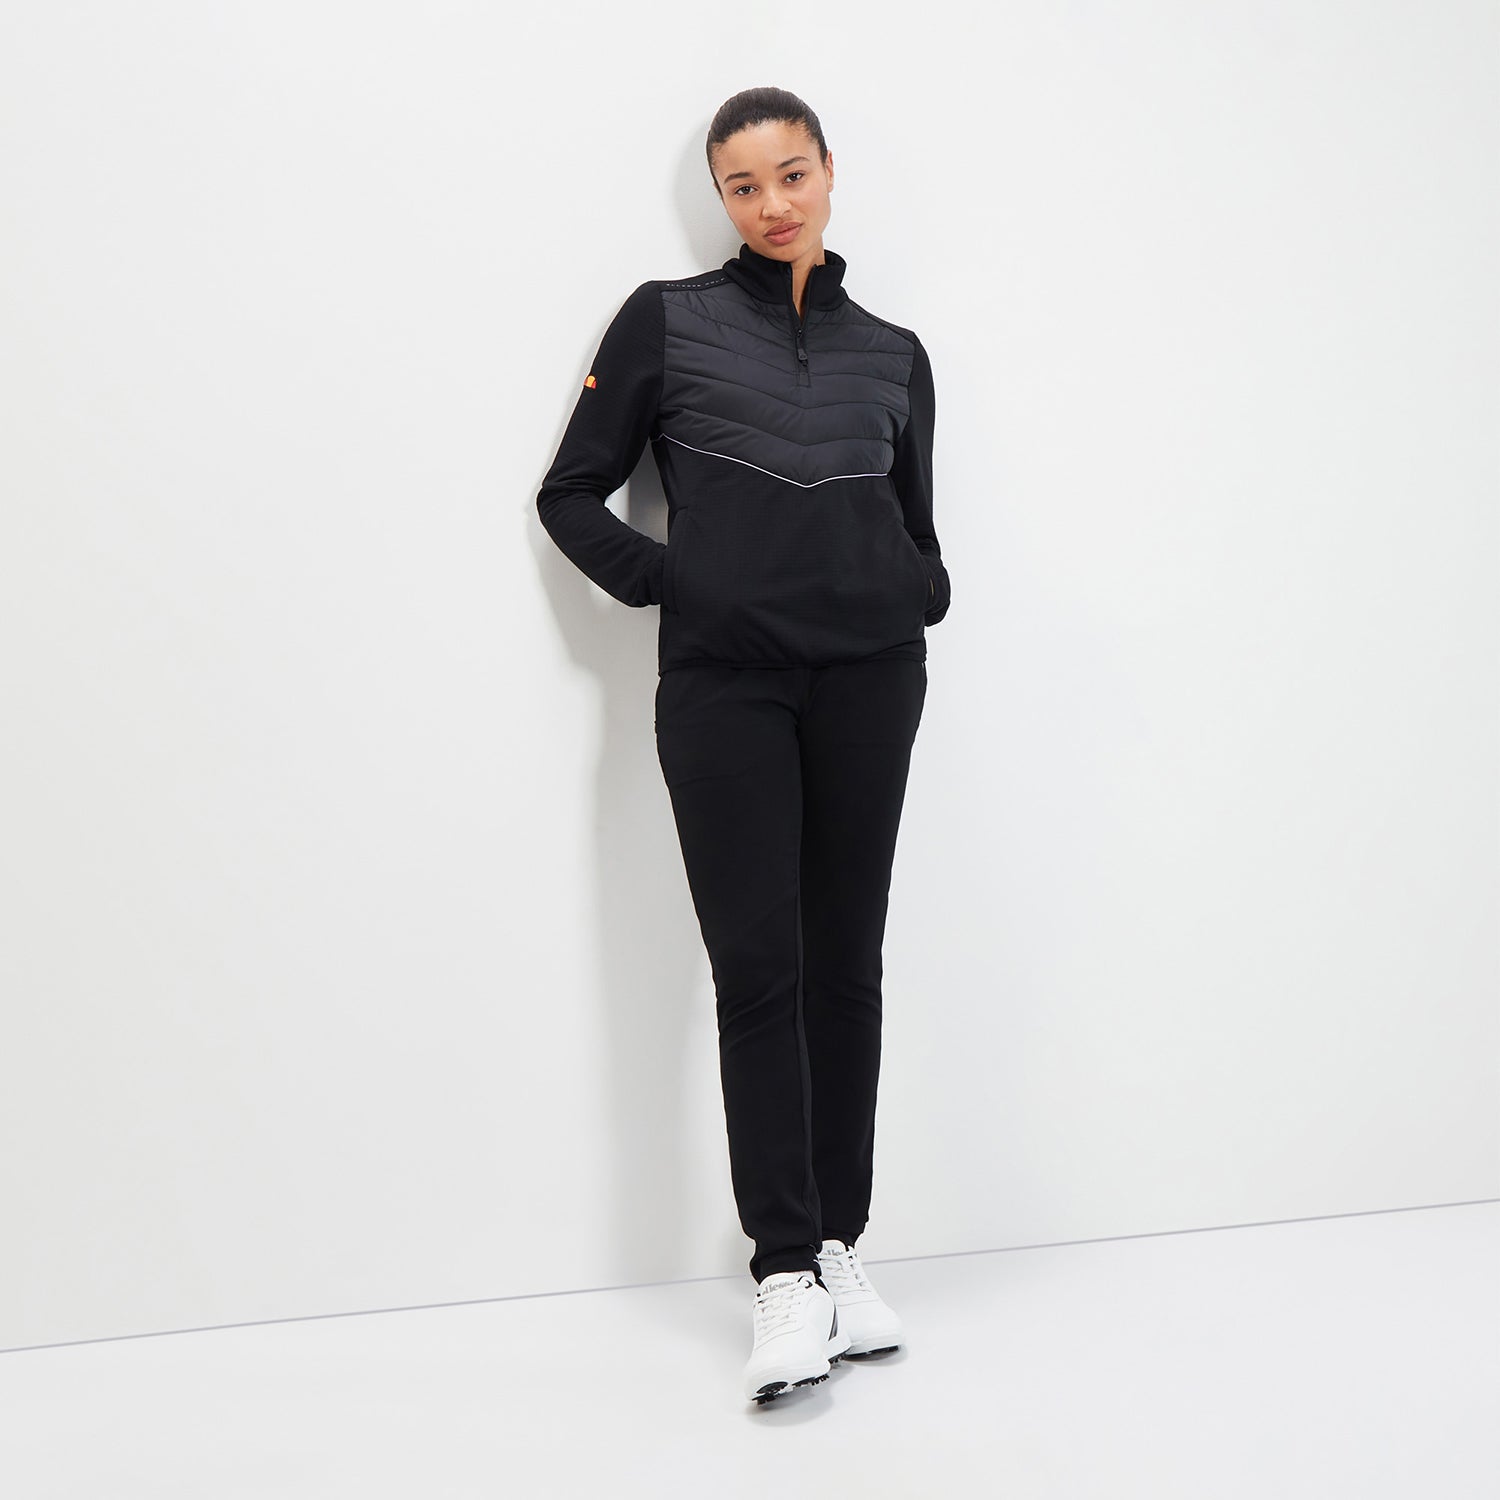 Ellesse Ladies Soft-Stretch Jacket with 1/4 Zip Neck and Quilted Panels in Black